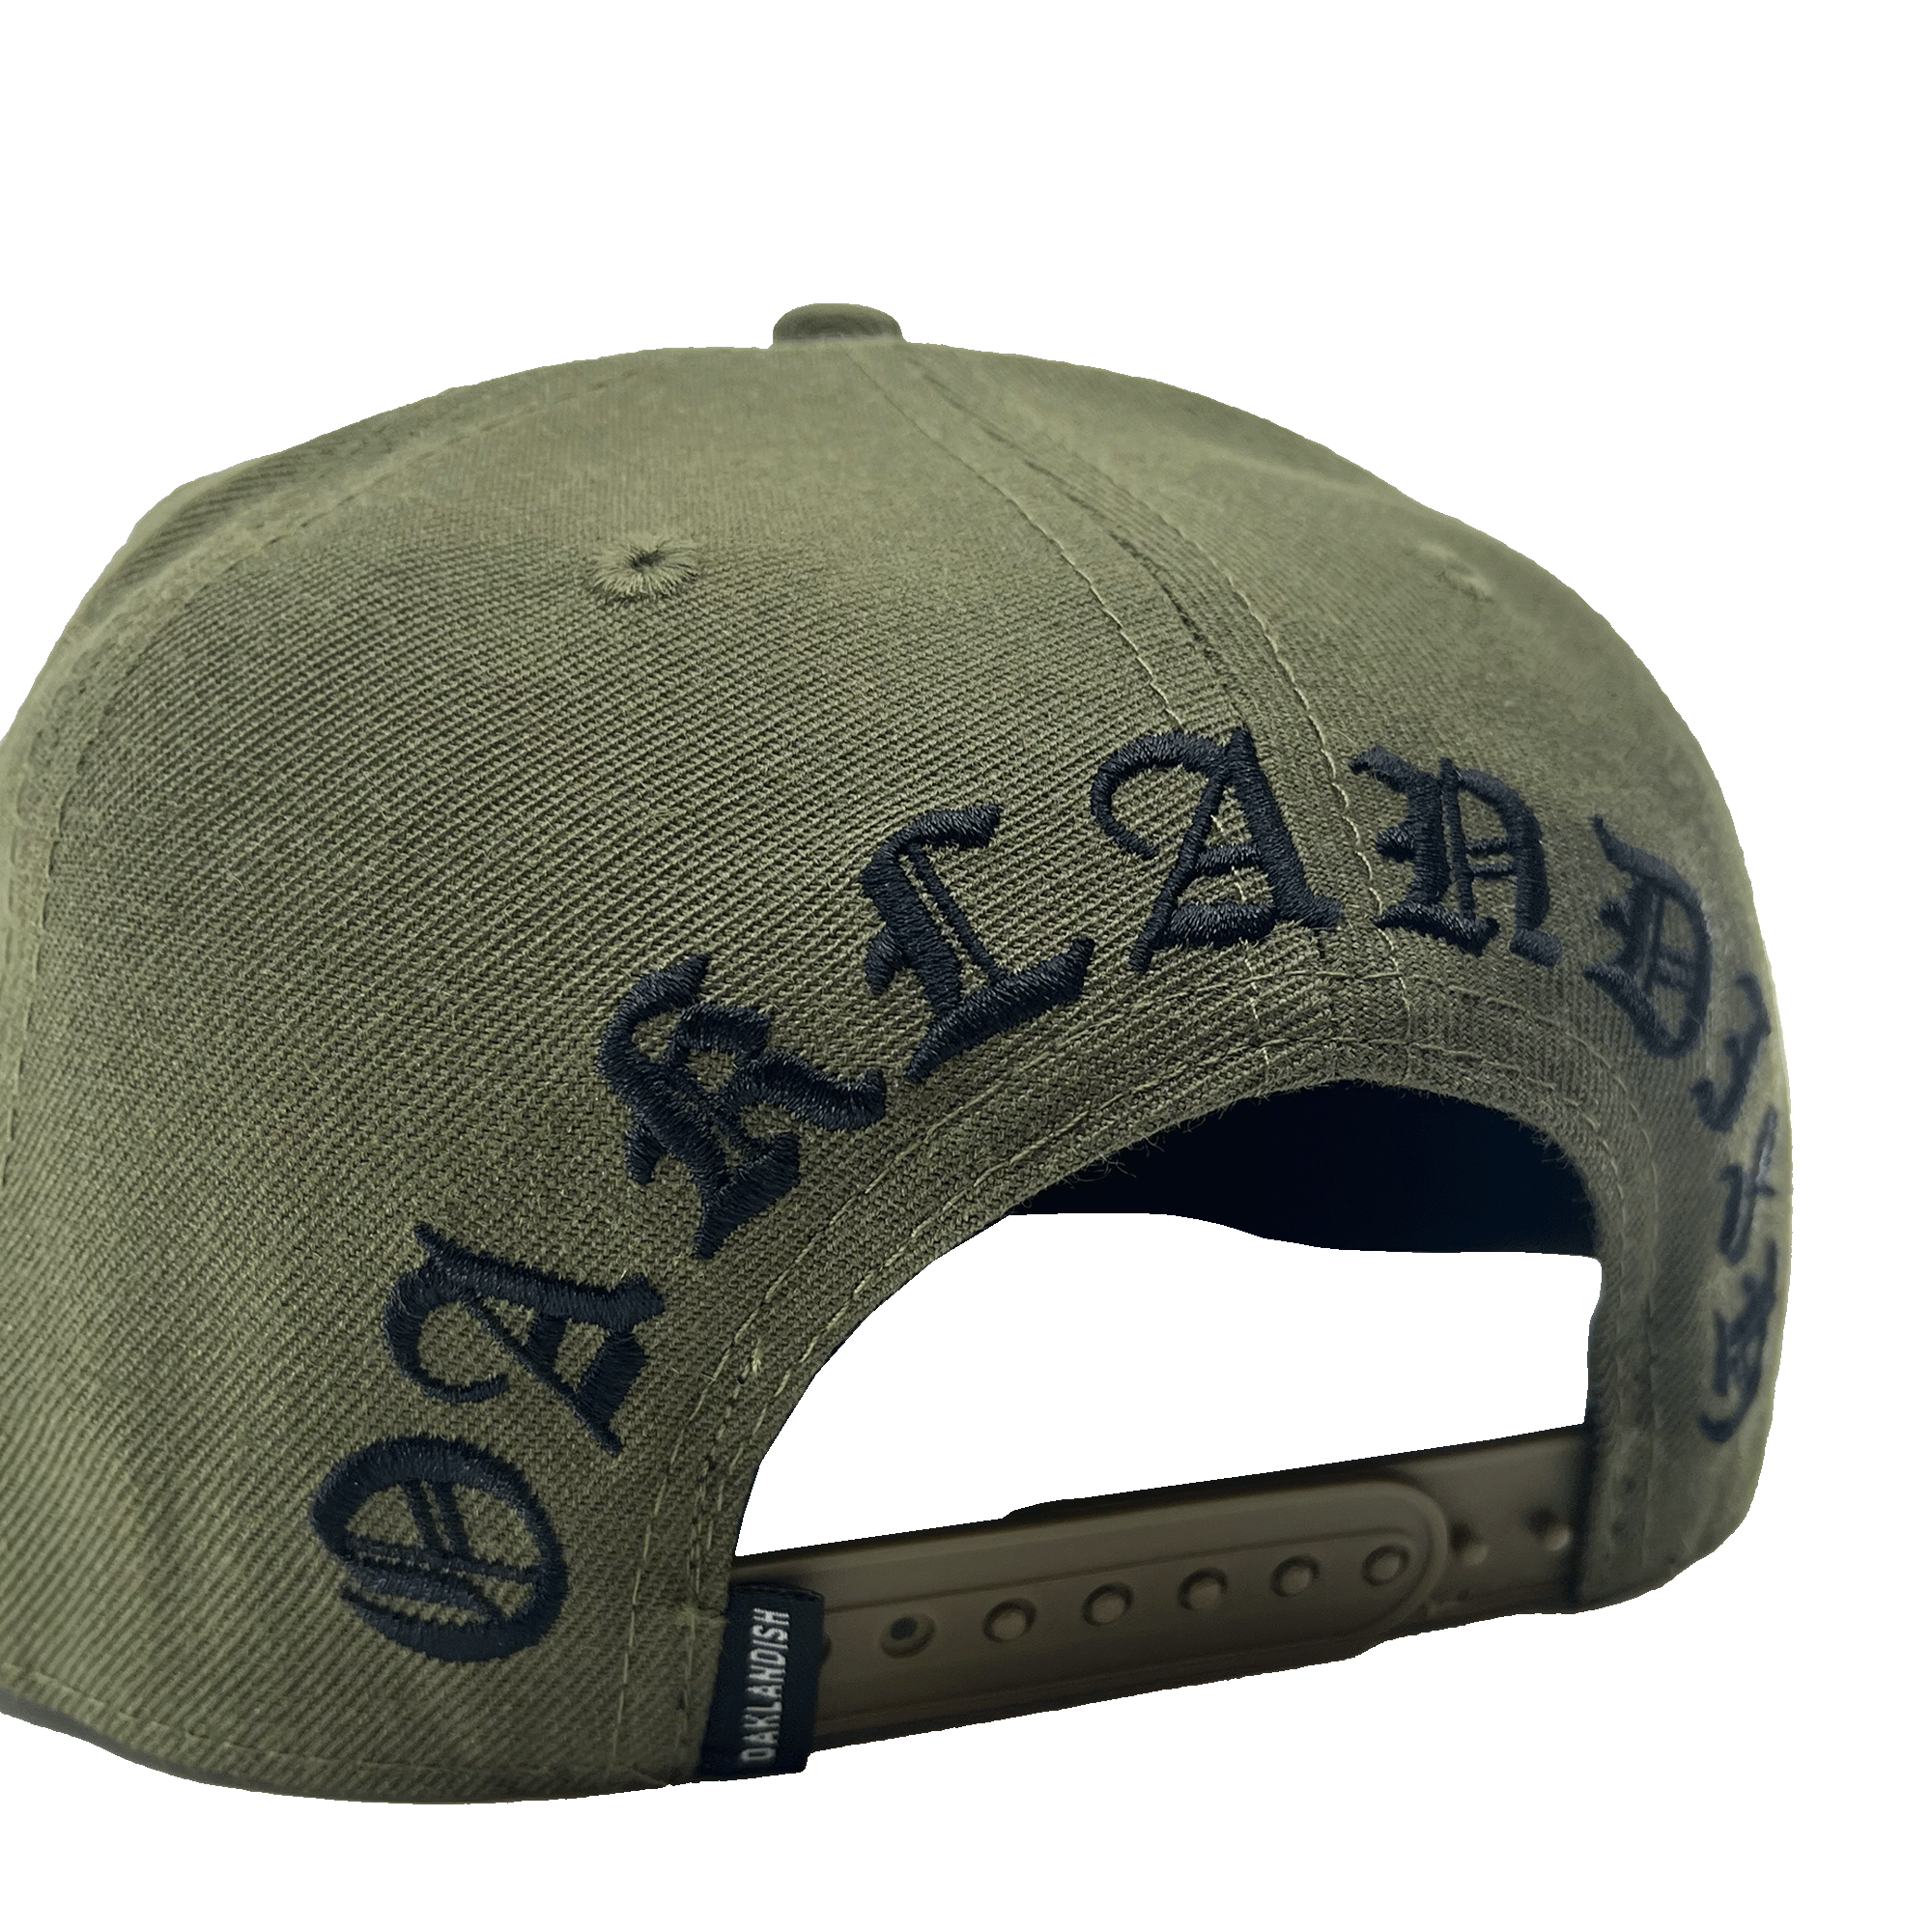 Side angled back view of green hat with snapback closure and small Oaklandish logo with large black embroidered Oaklandish wordmark in Old English script.